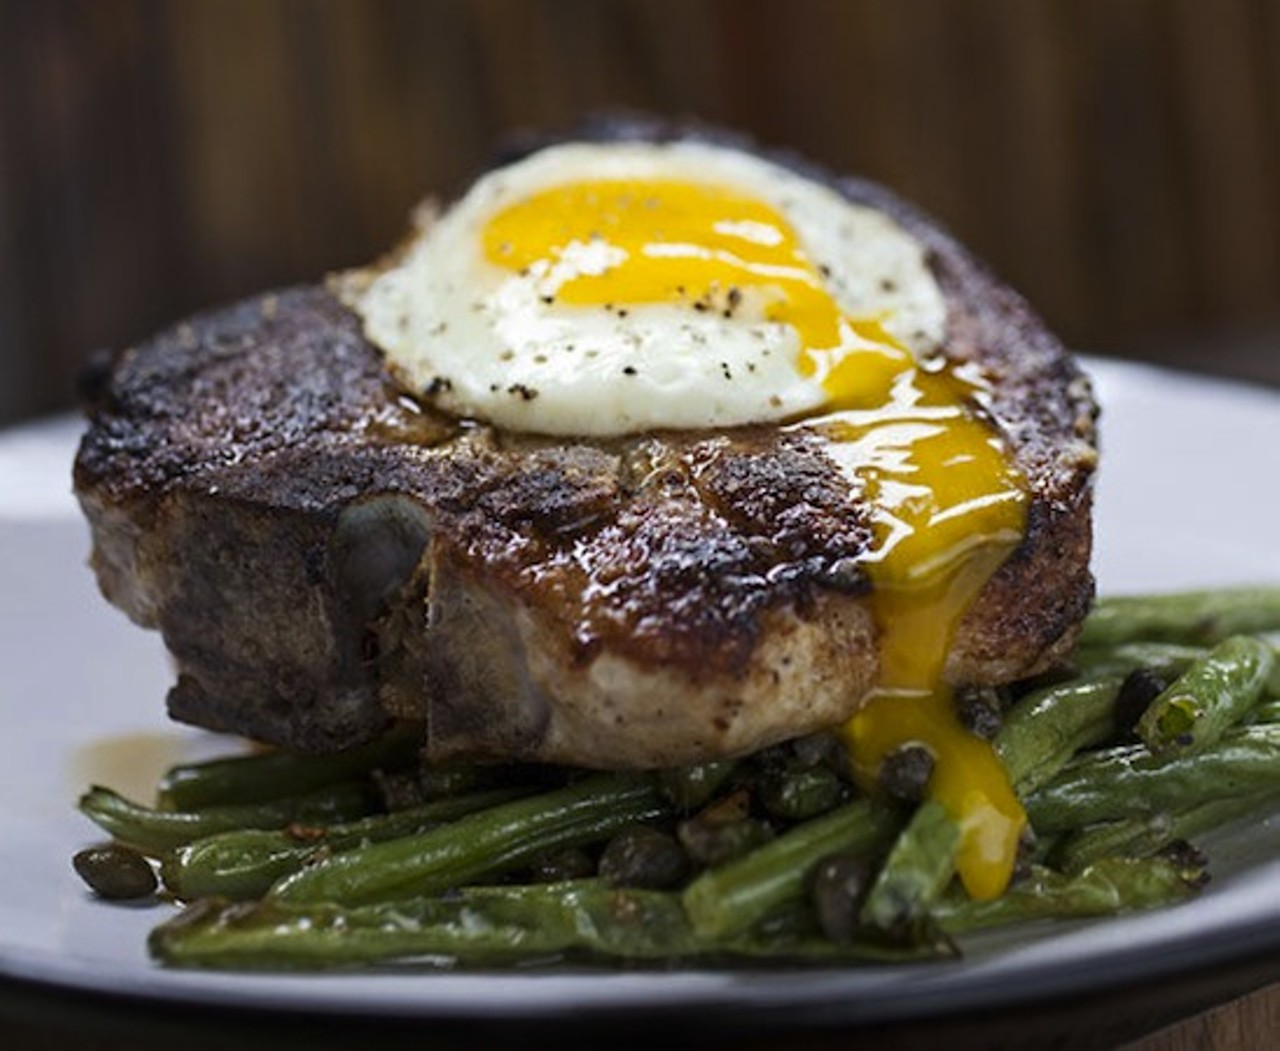 4. The "Pork Porterhouse" at Cleveland-Heath
The pork chop "porterhouse," topped with a sunny-side-up egg and served over jalape&ntilde;o-cheddar bread pudding, perfectly captures the Cleveland-Heath aesthetic of elevated comfort food.